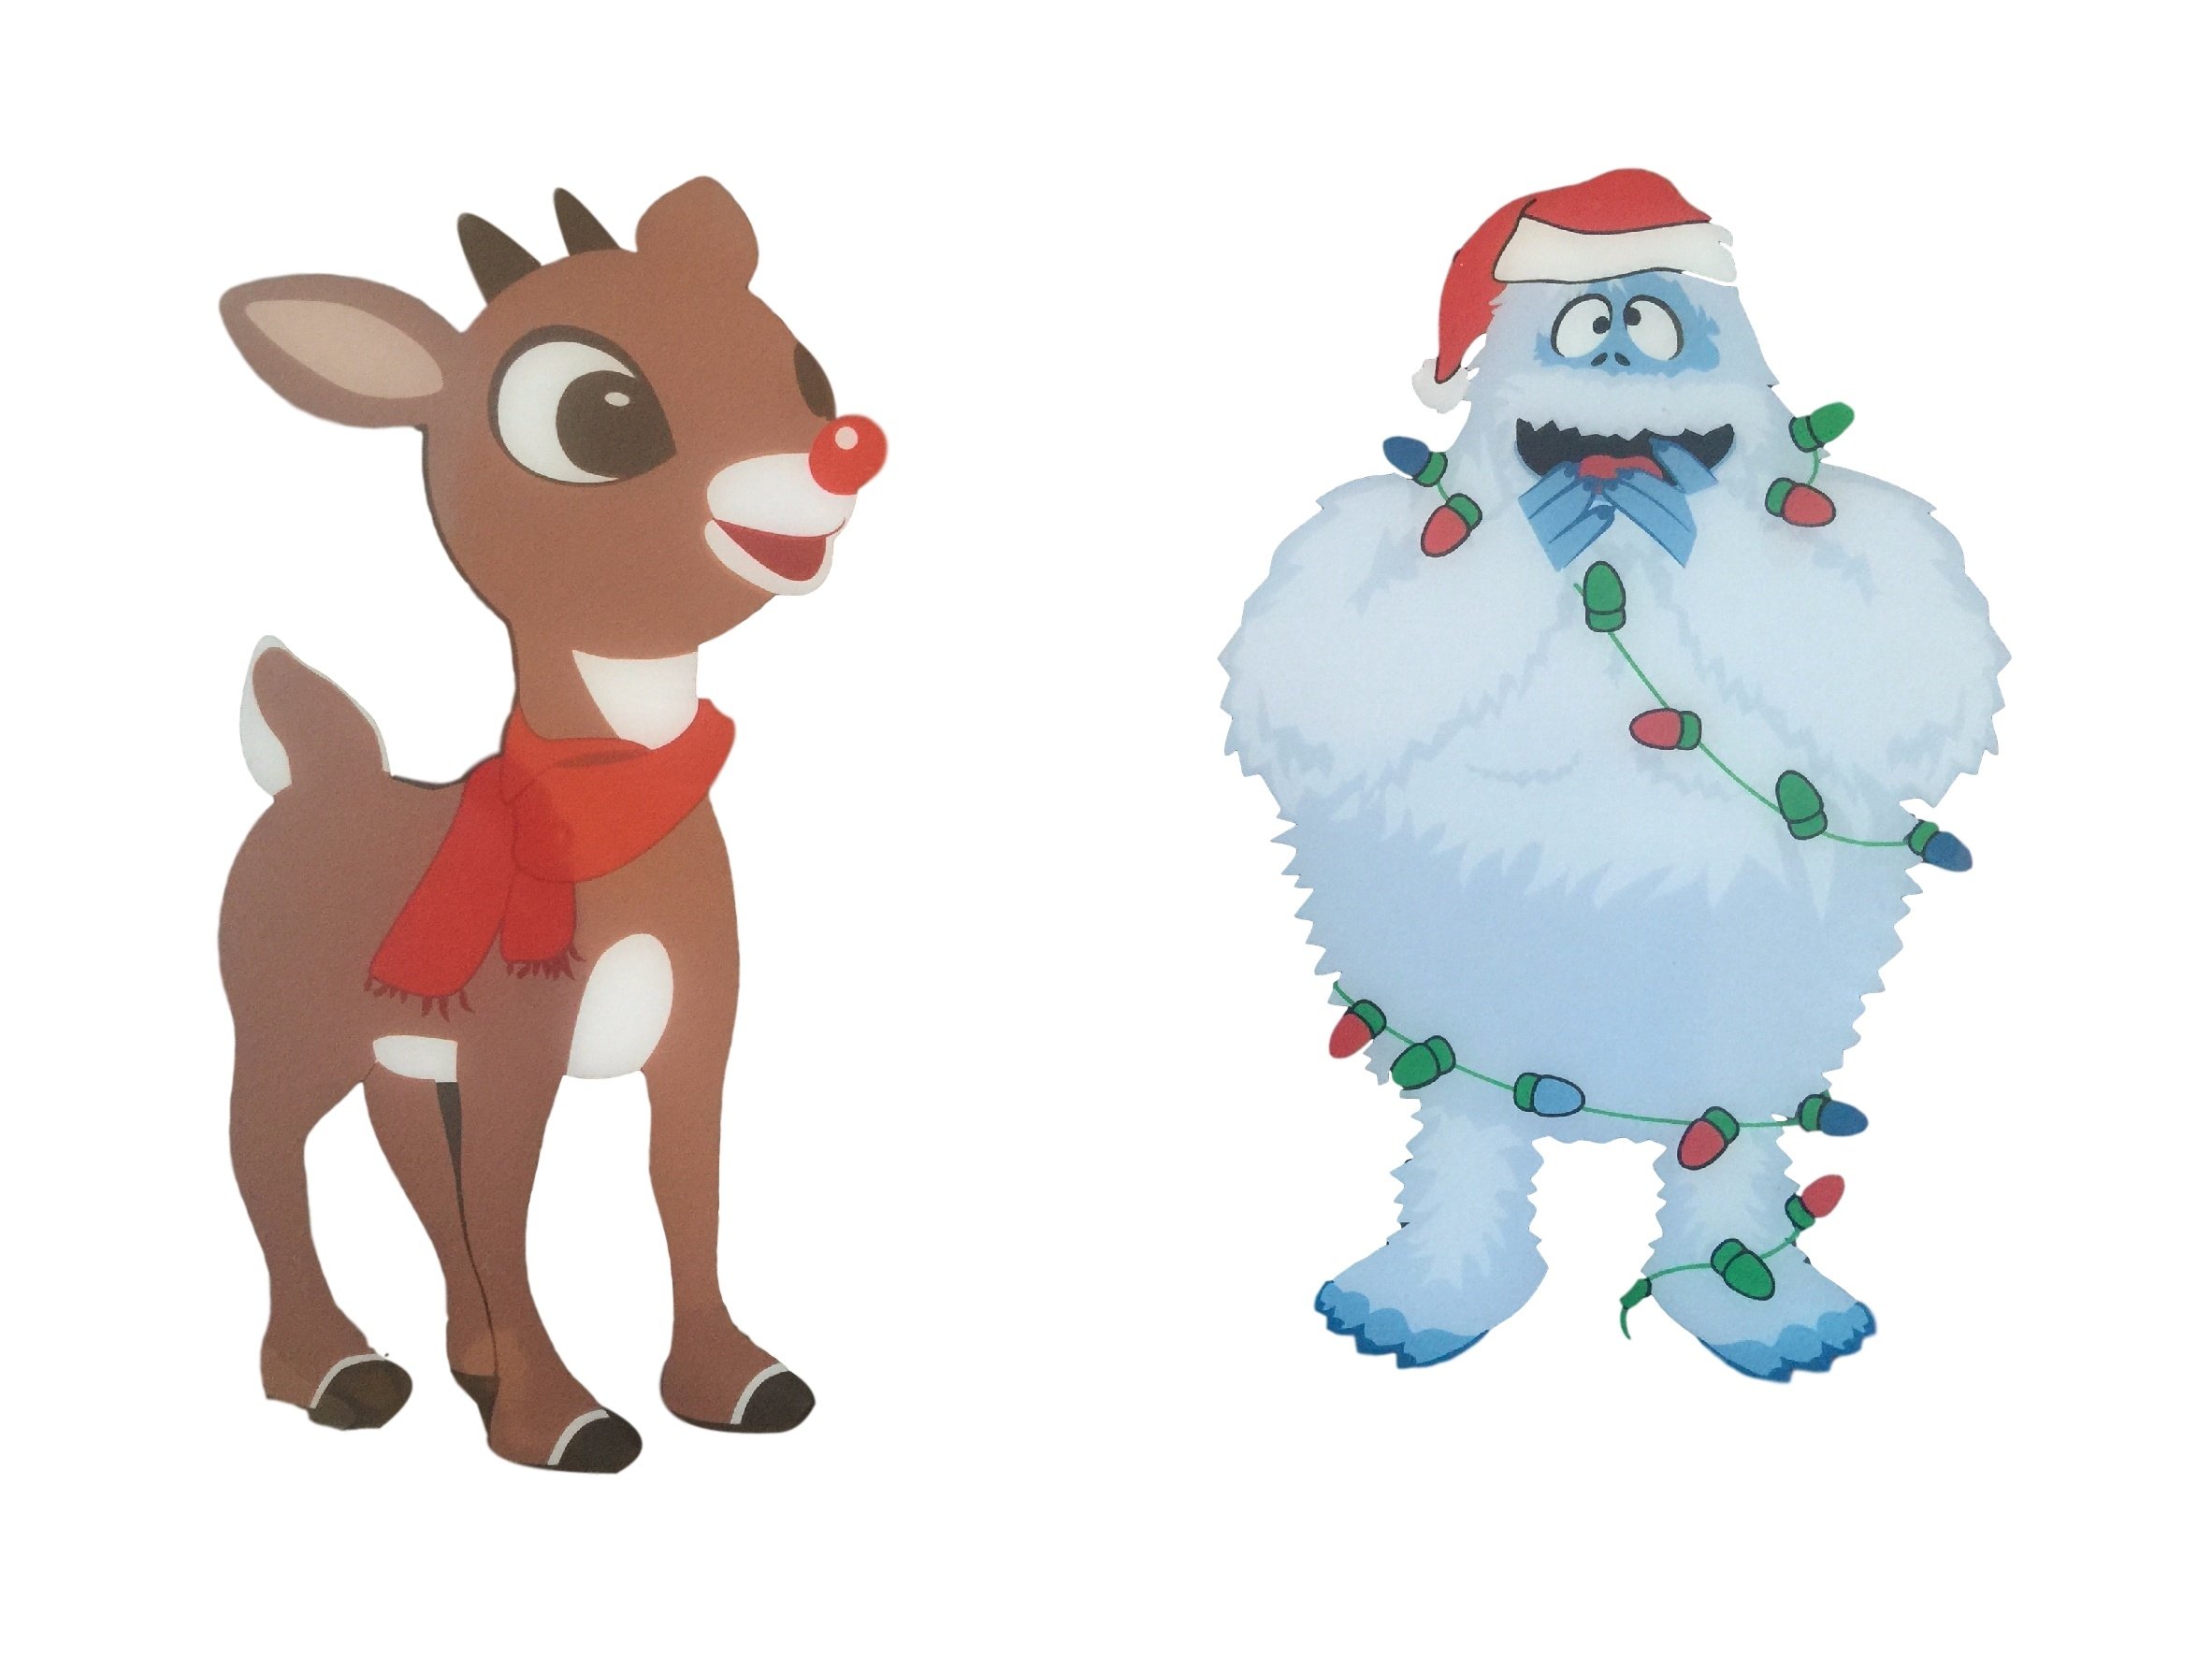 Abominable Snowman Clipart at GetDrawings.com.